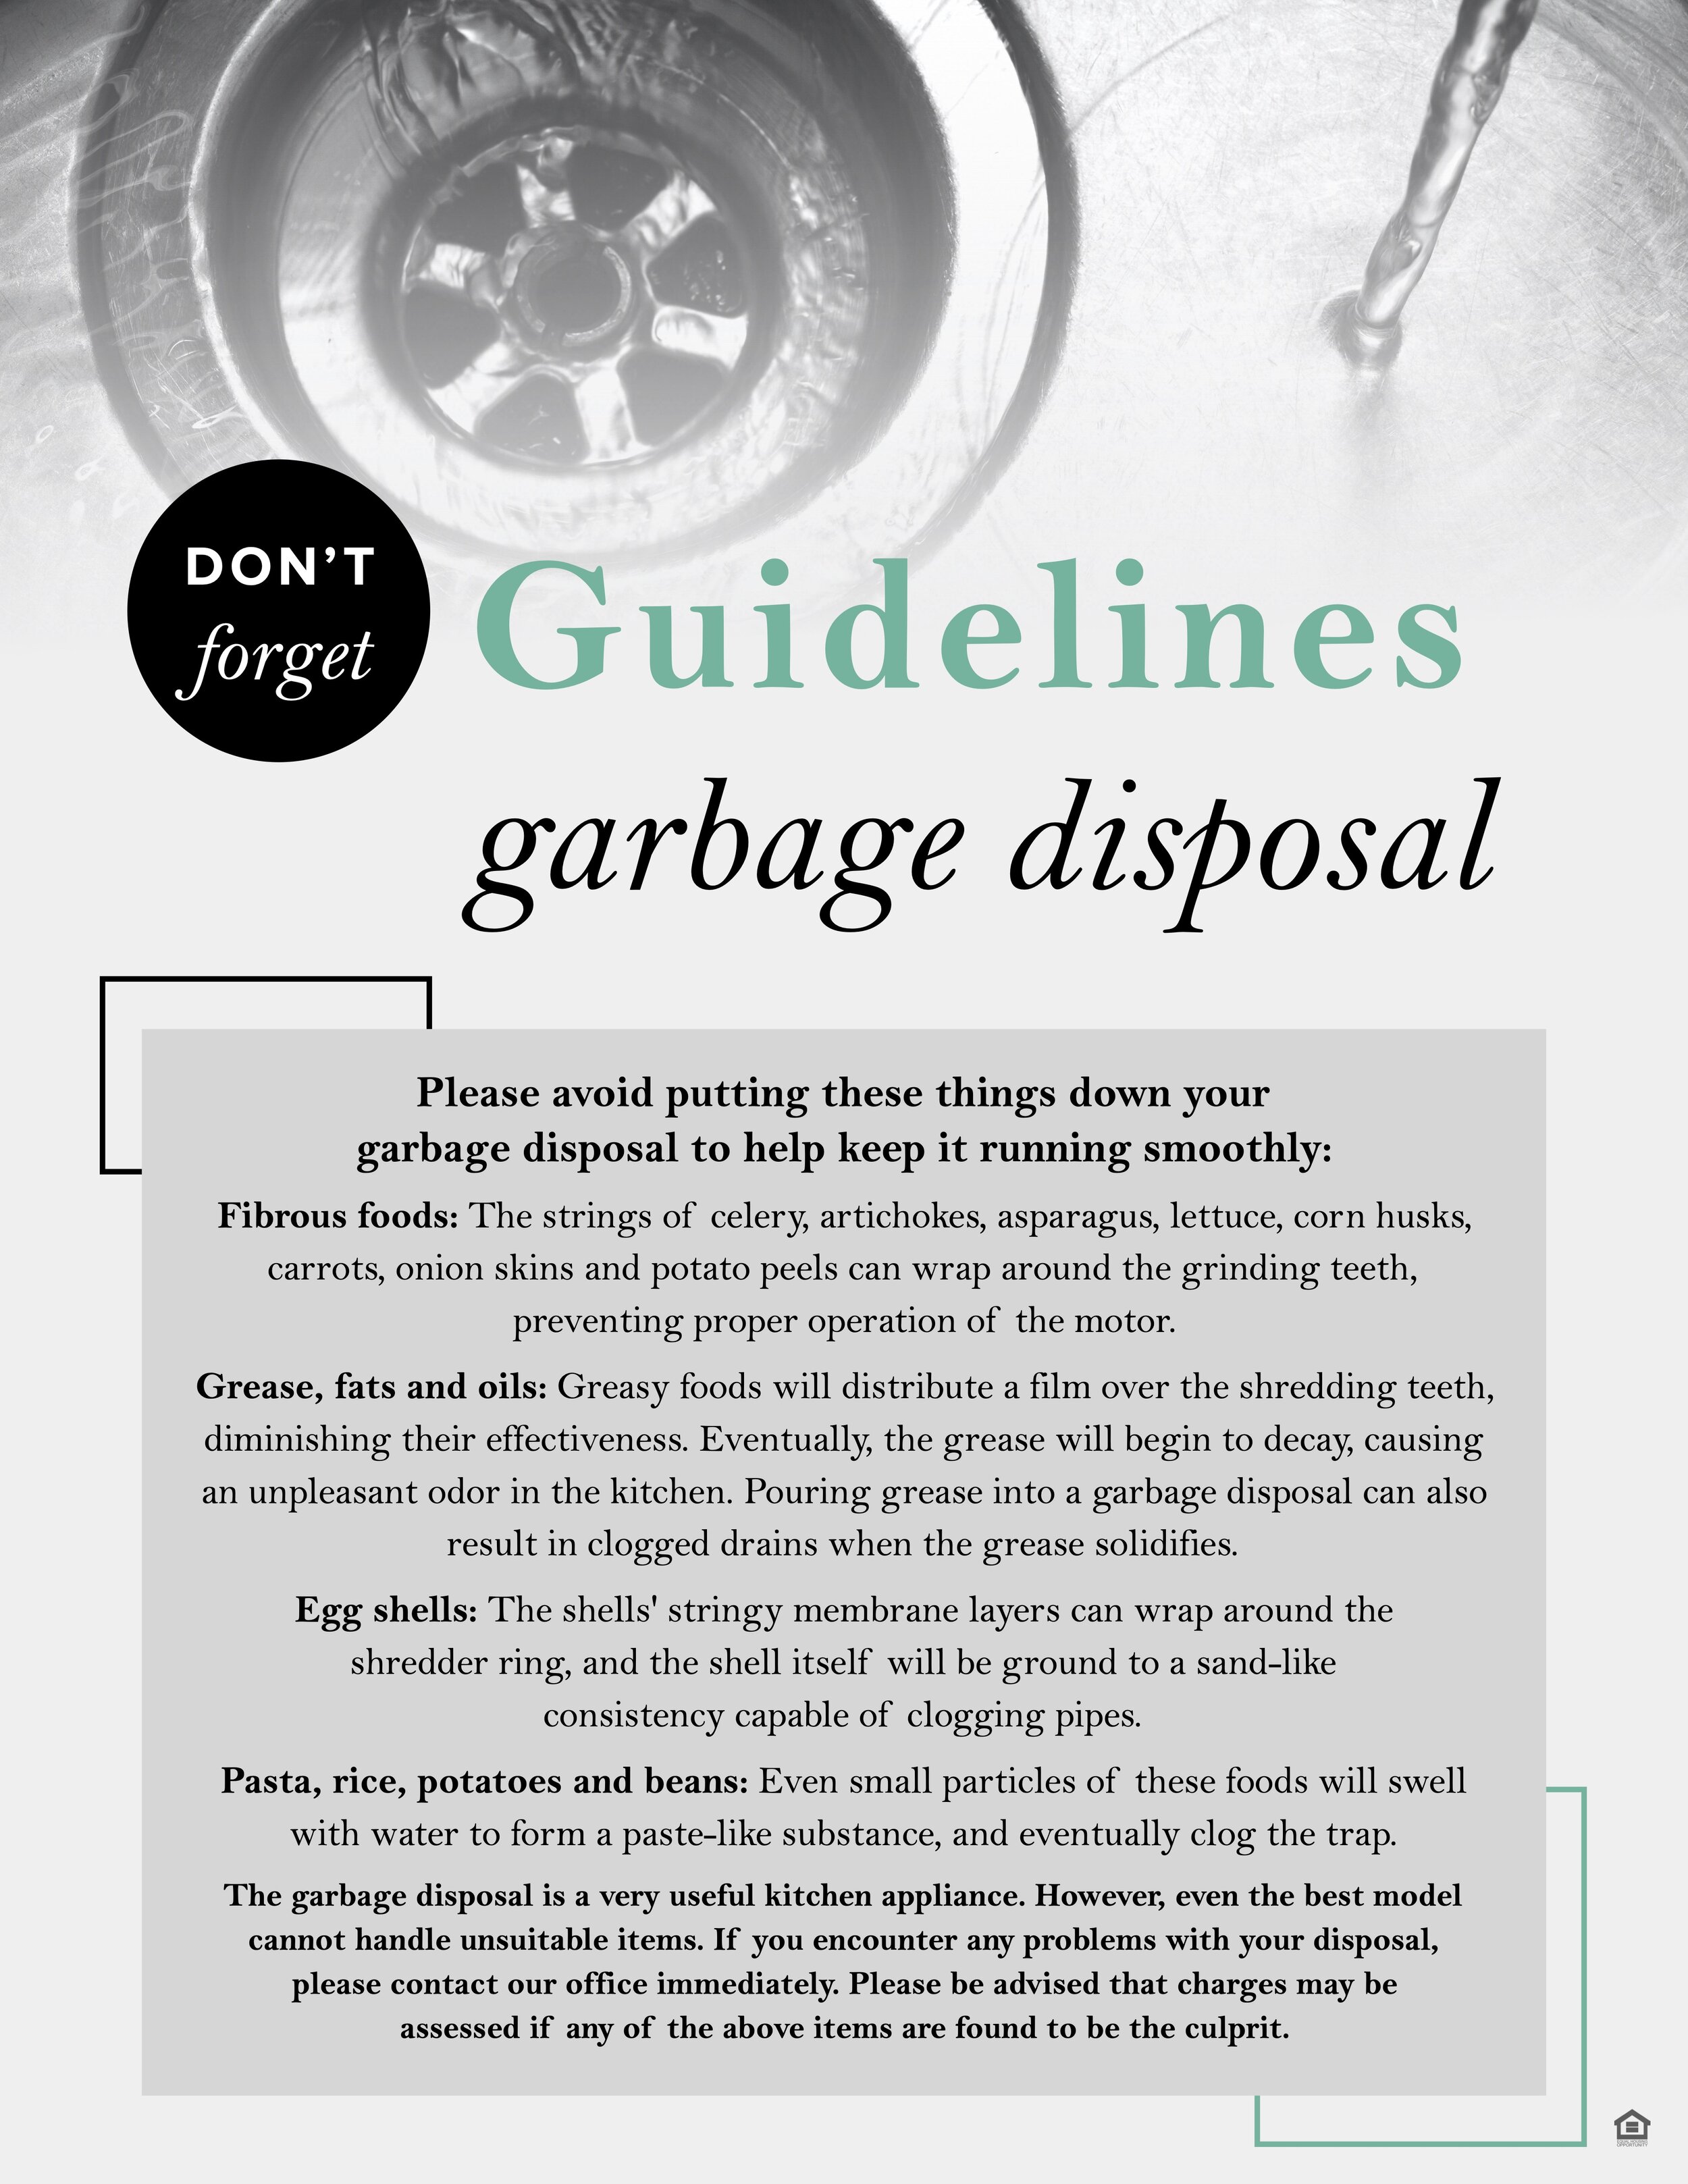 61815-Green FC Garbage Disposal Donts Notice.jpg